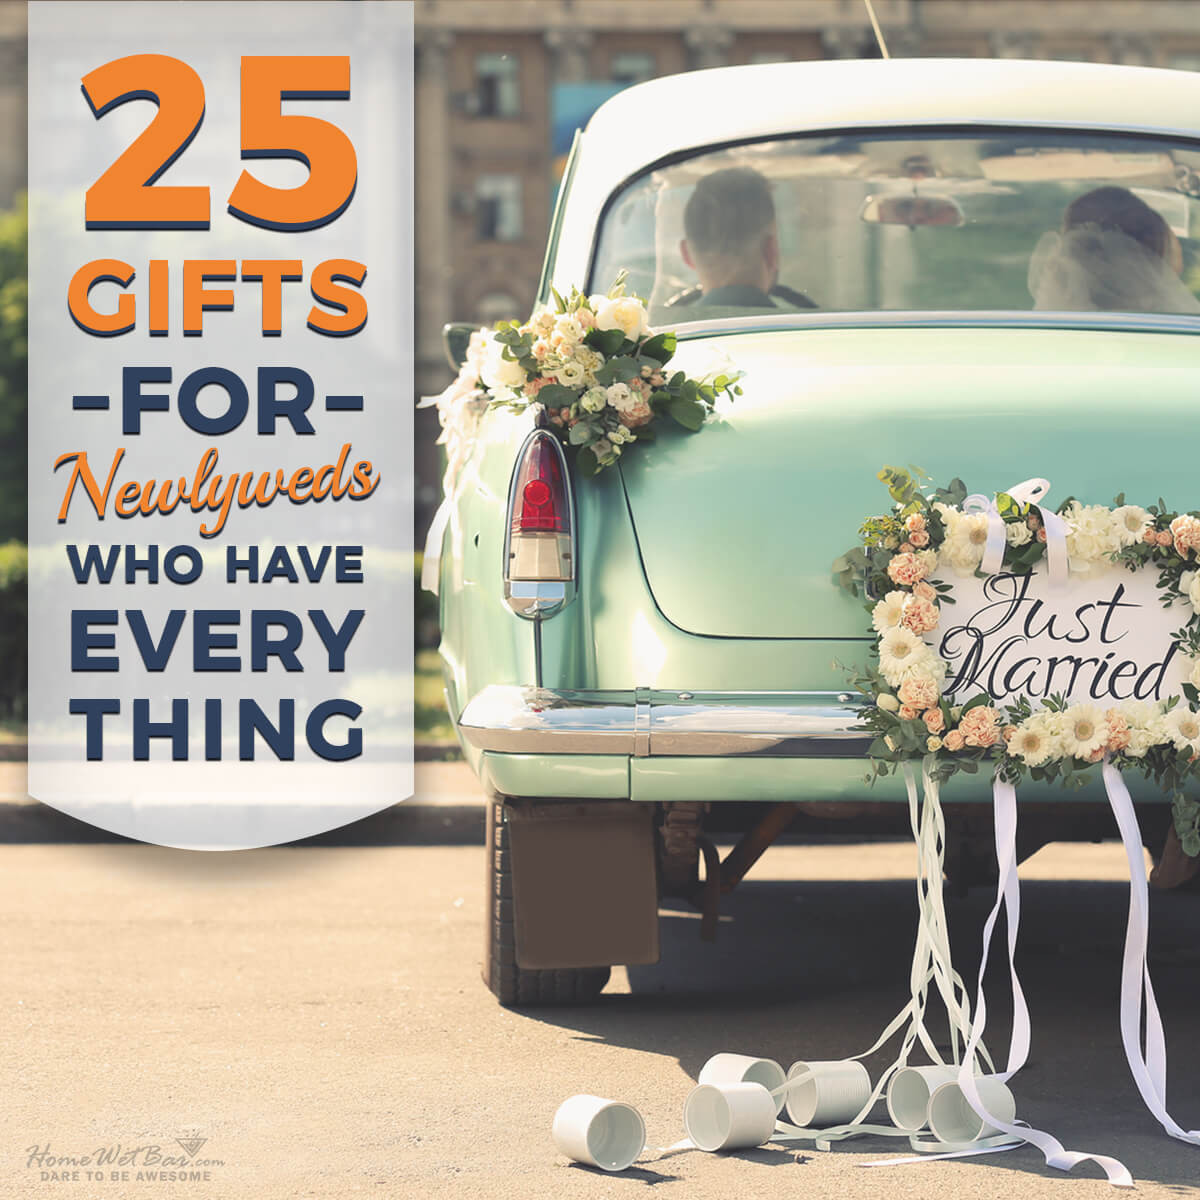 Gift Ideas For Newly Married Couple
 25 Gifts for Newlyweds Who Have Everything